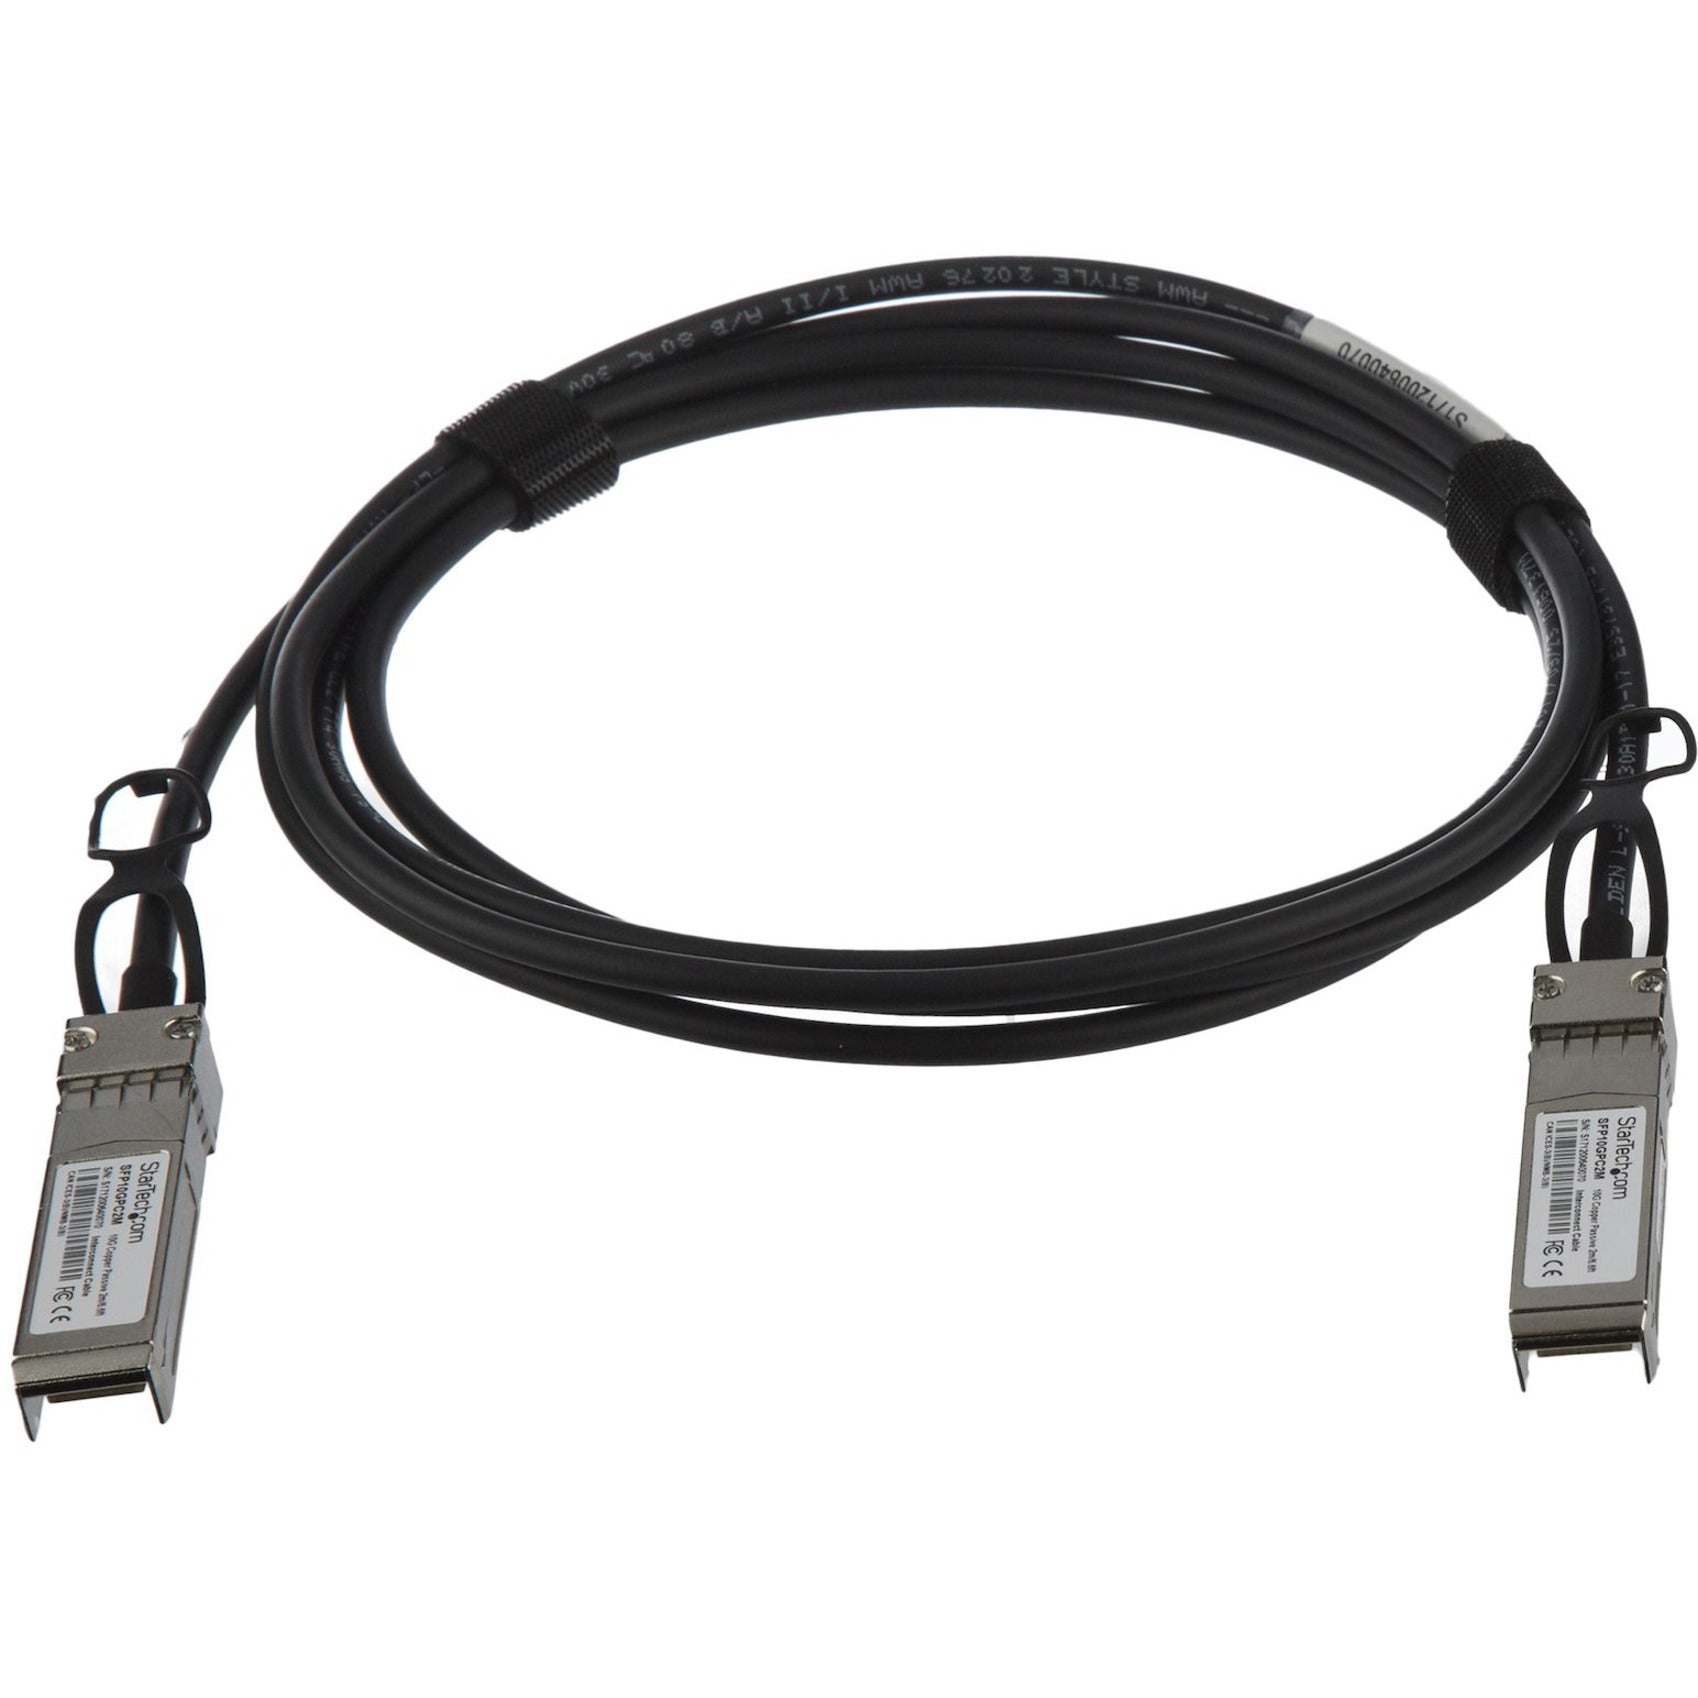 StarTech.com SFP10GPC2M SFP+ Direct Attach Cable - MSA Compliant - 2 m (6.6 ft.), Passive, Hot-swappable, 10 Gbit/s Data Transfer Rate, Twinaxial Network Cable